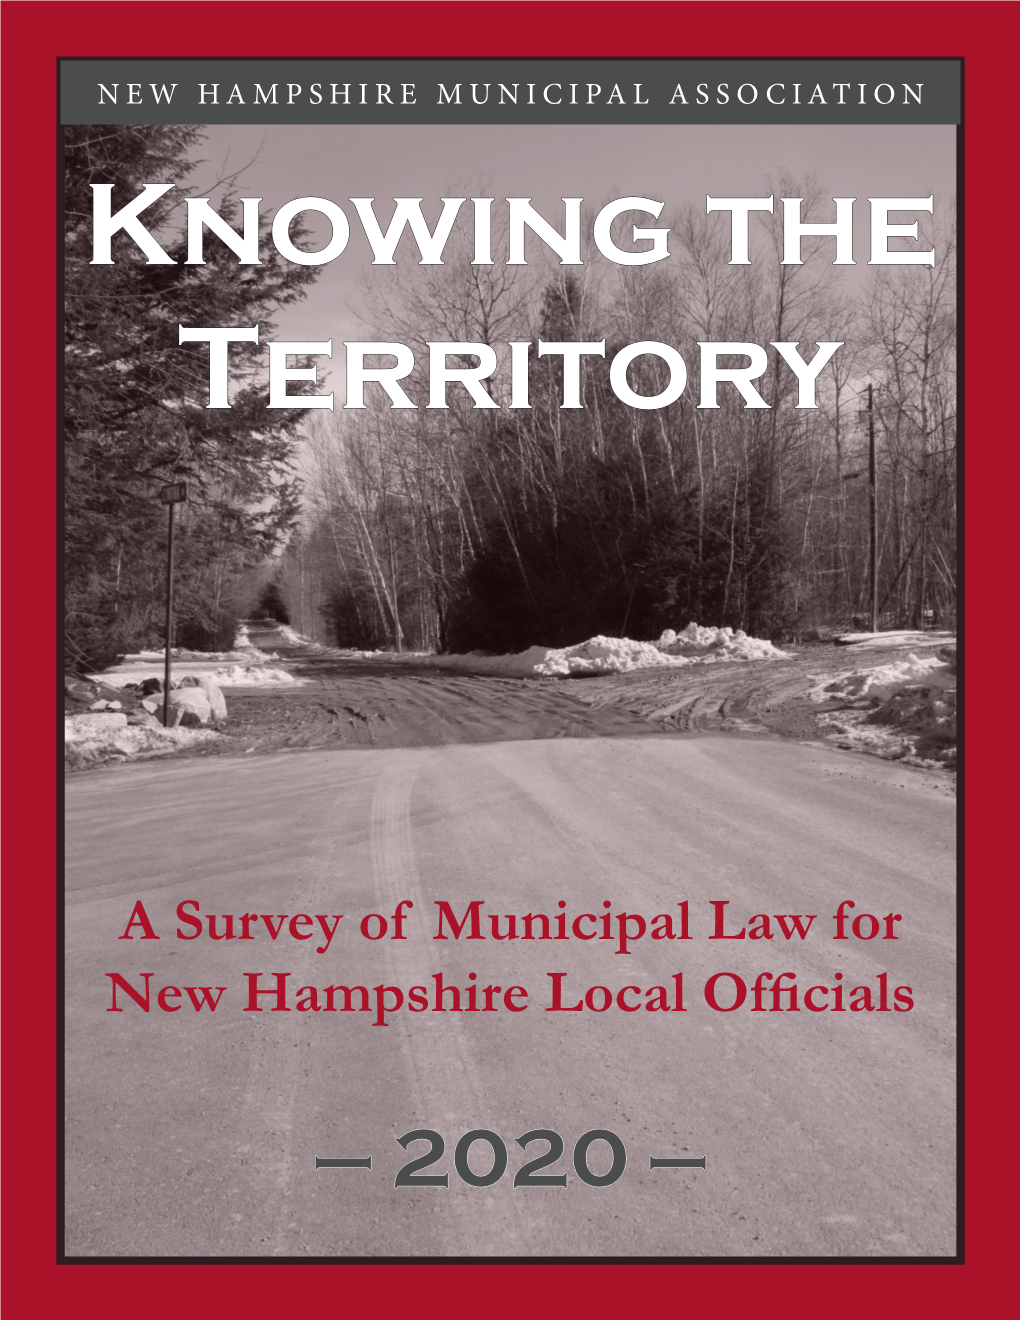 A Survey of Municipal Law for New Hampshire Local Officials